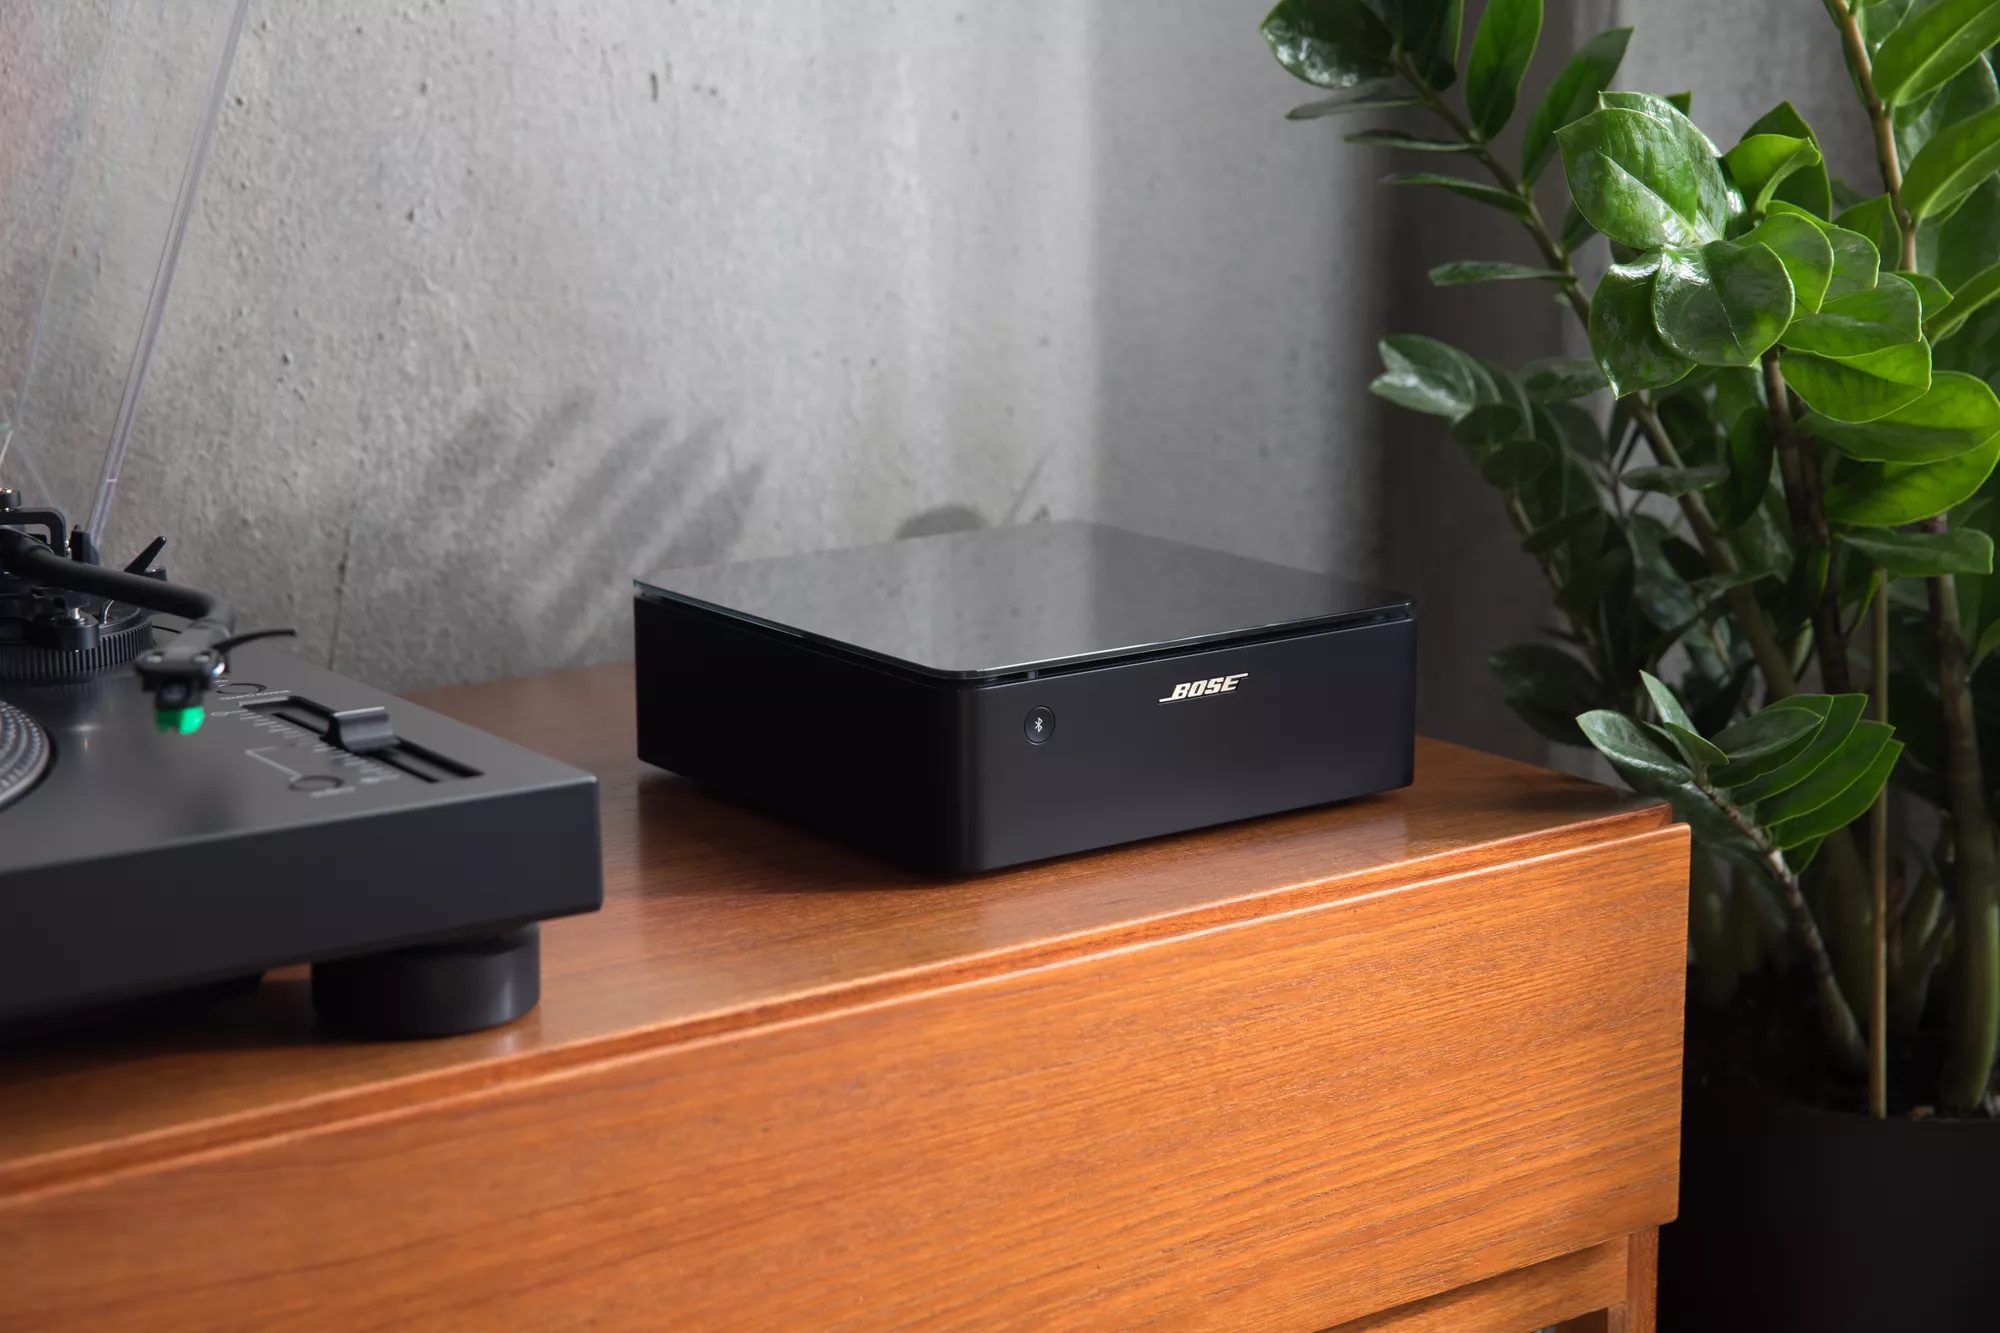 Bose Music Amplifier resting on table next to vinyl record player with plant in background